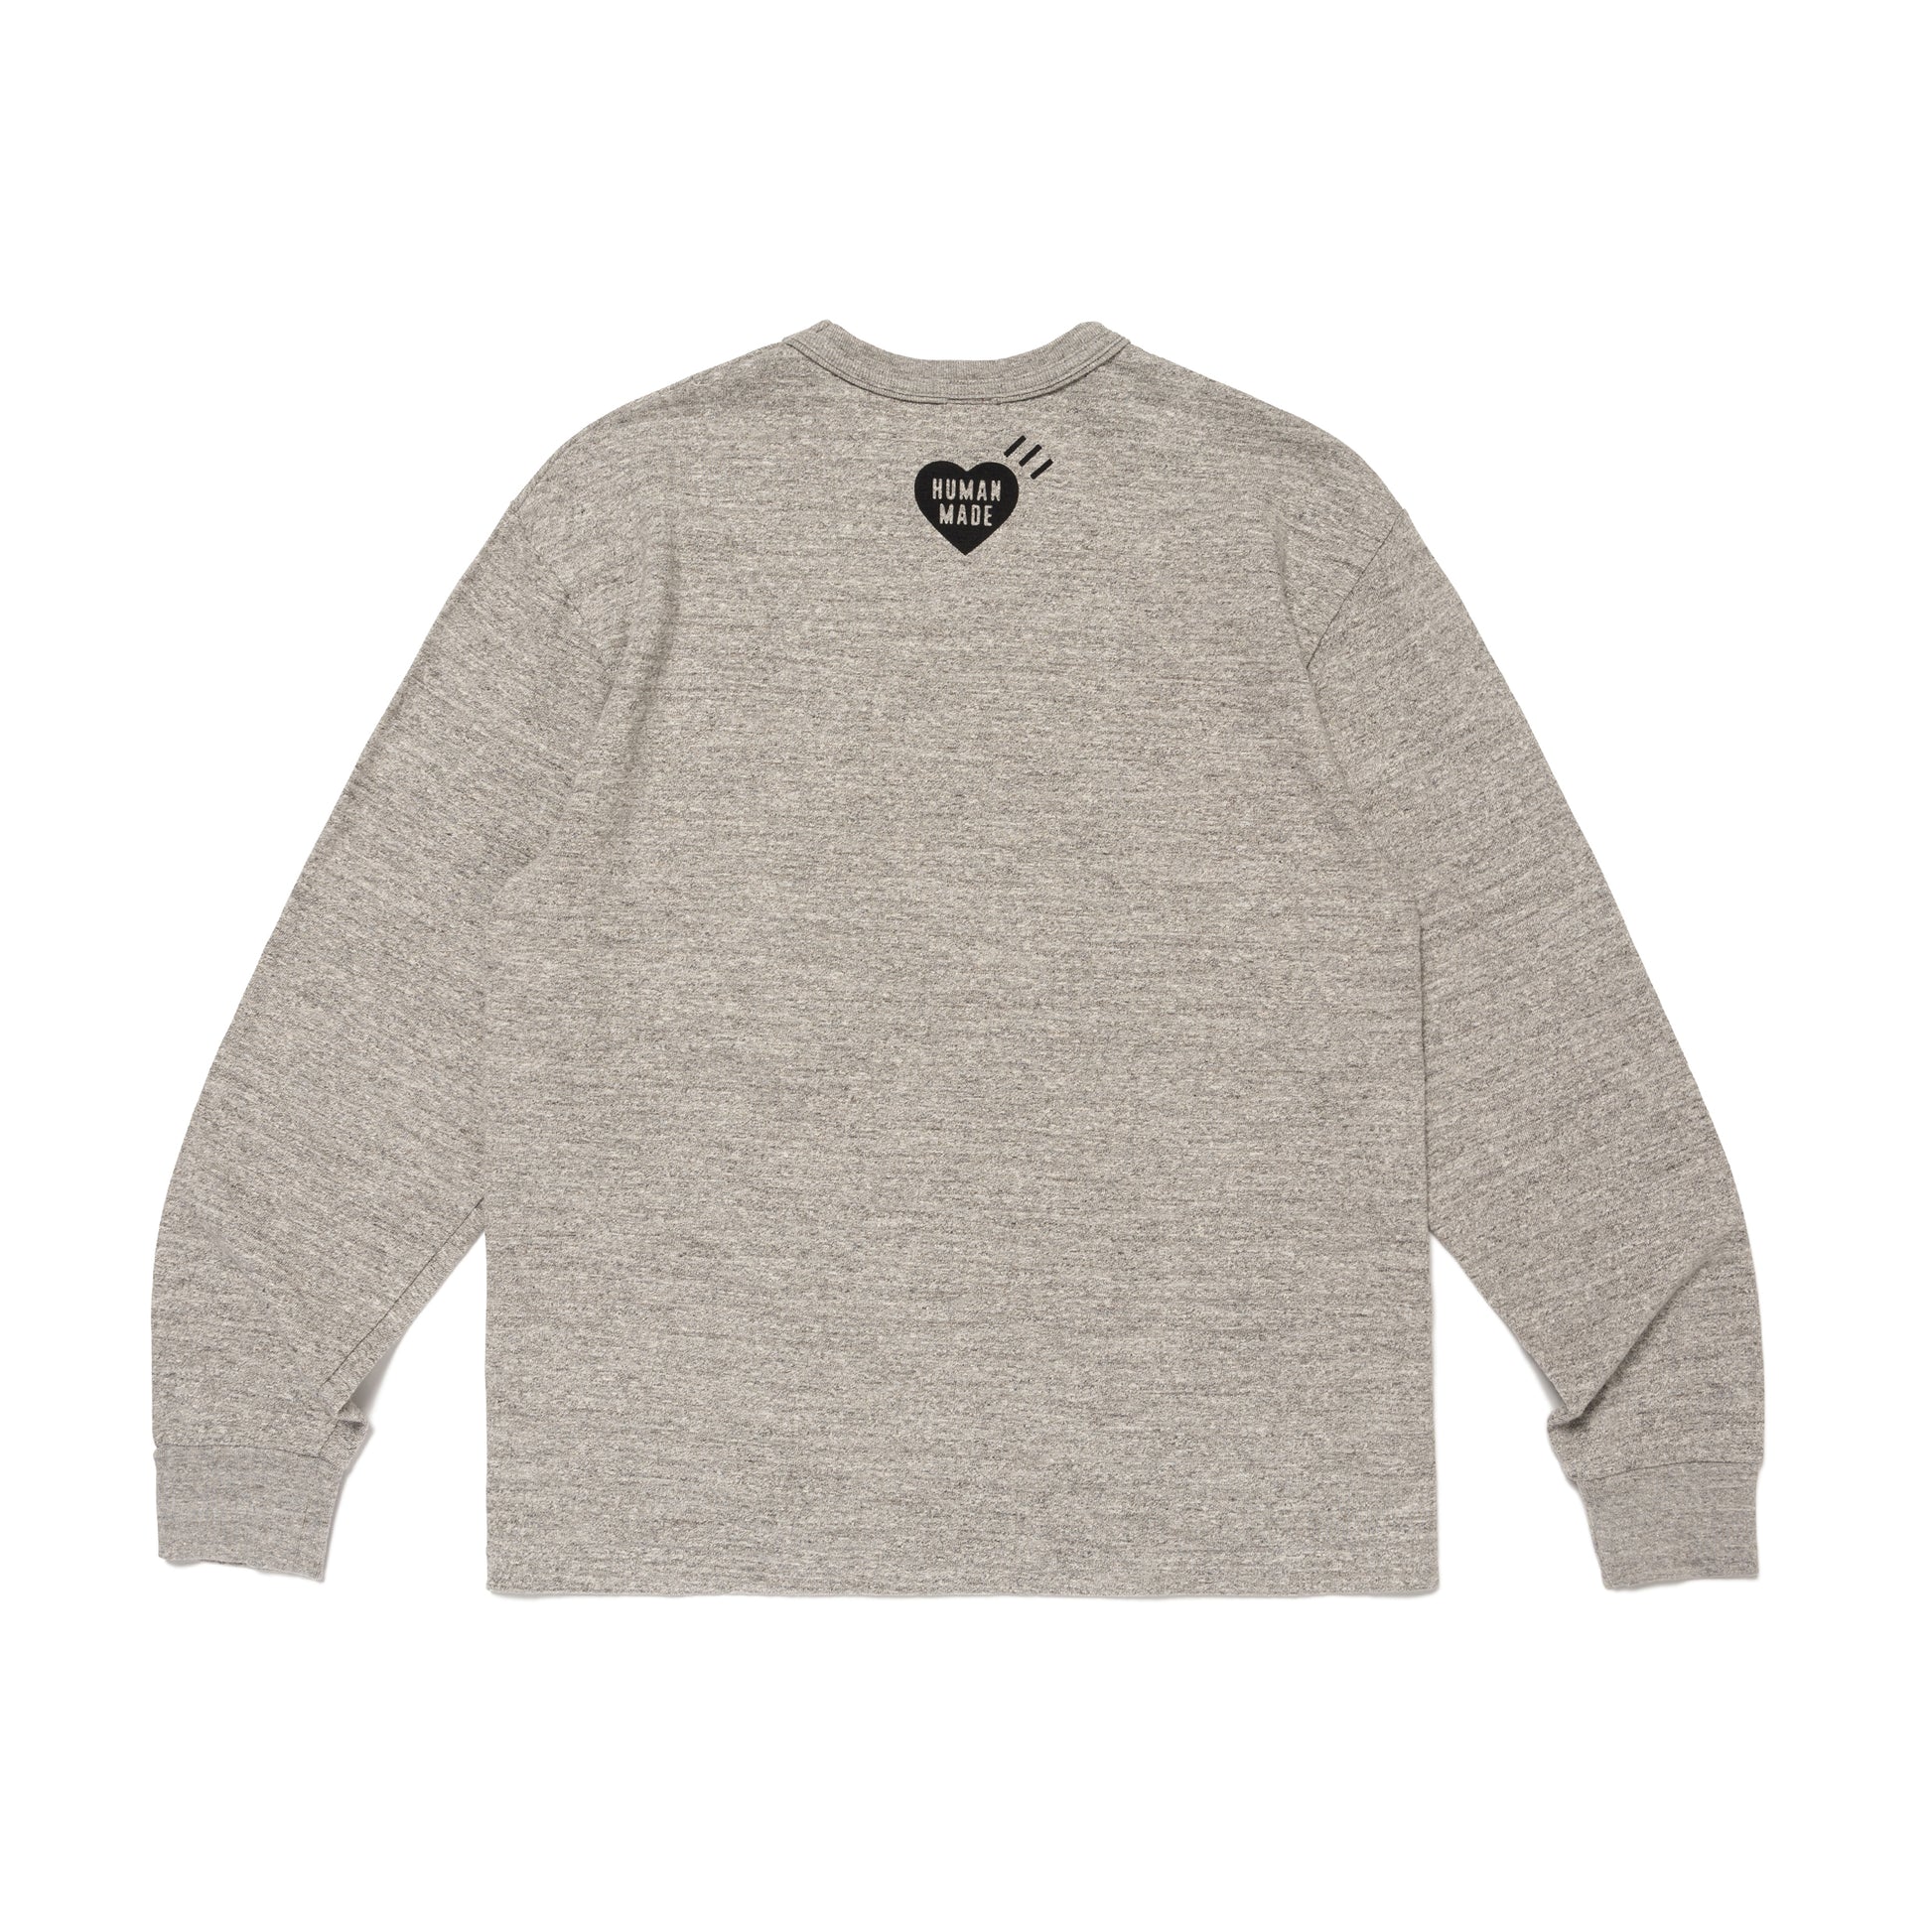 HUMAN MADE GRAPHIC L/S T-SHIRT GY-B